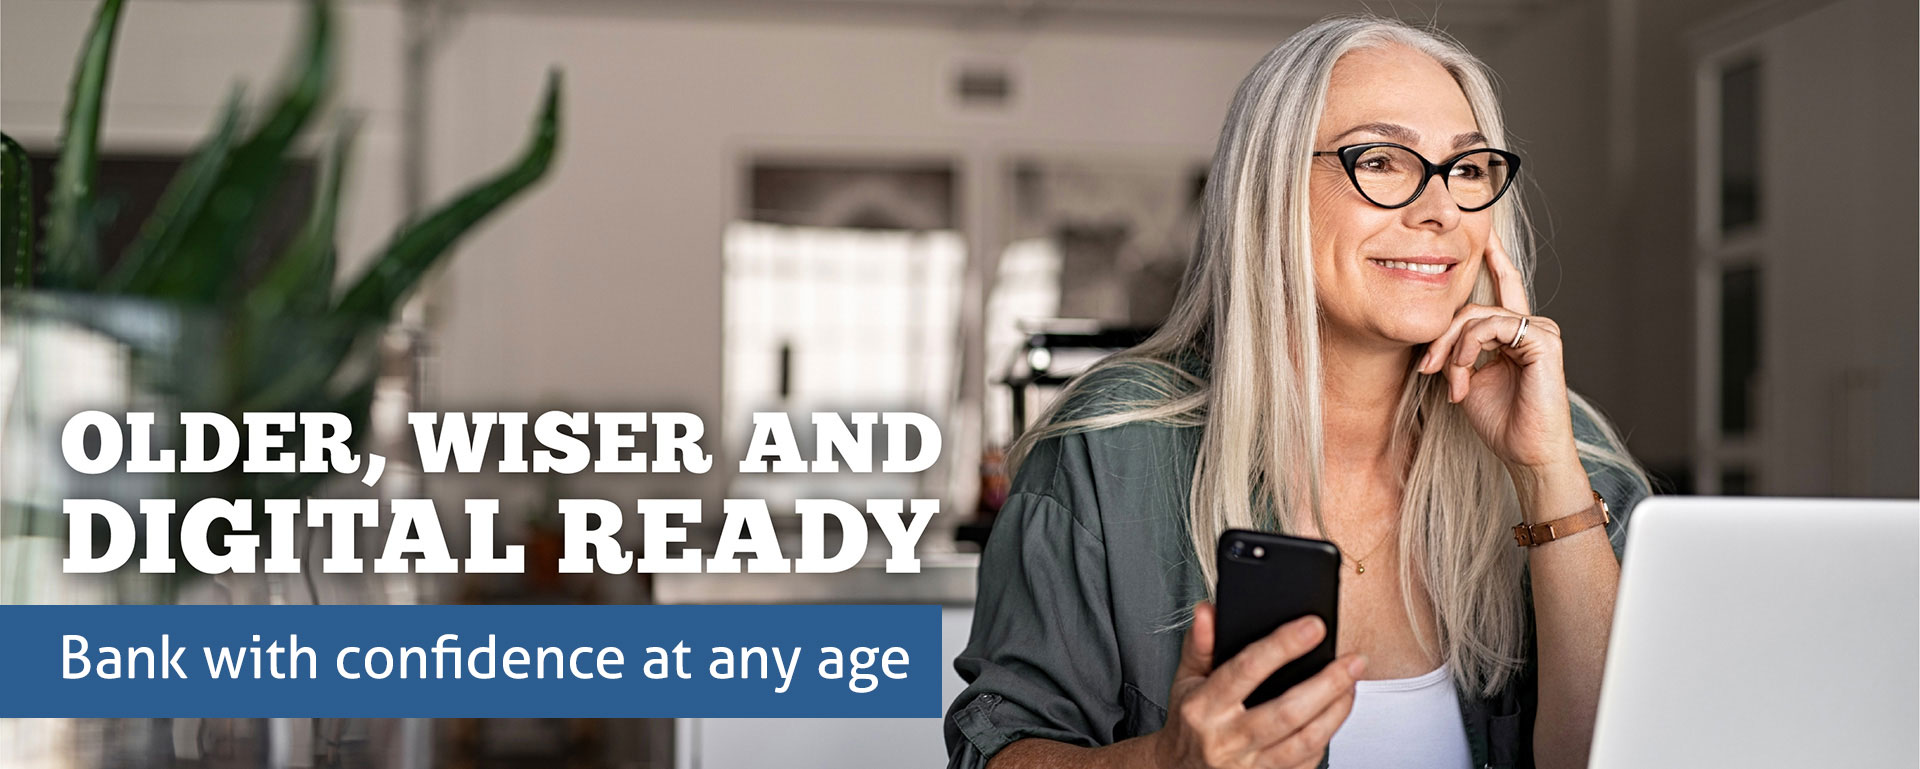 Older, wiser and digital ready. Bank with confidence at any age.